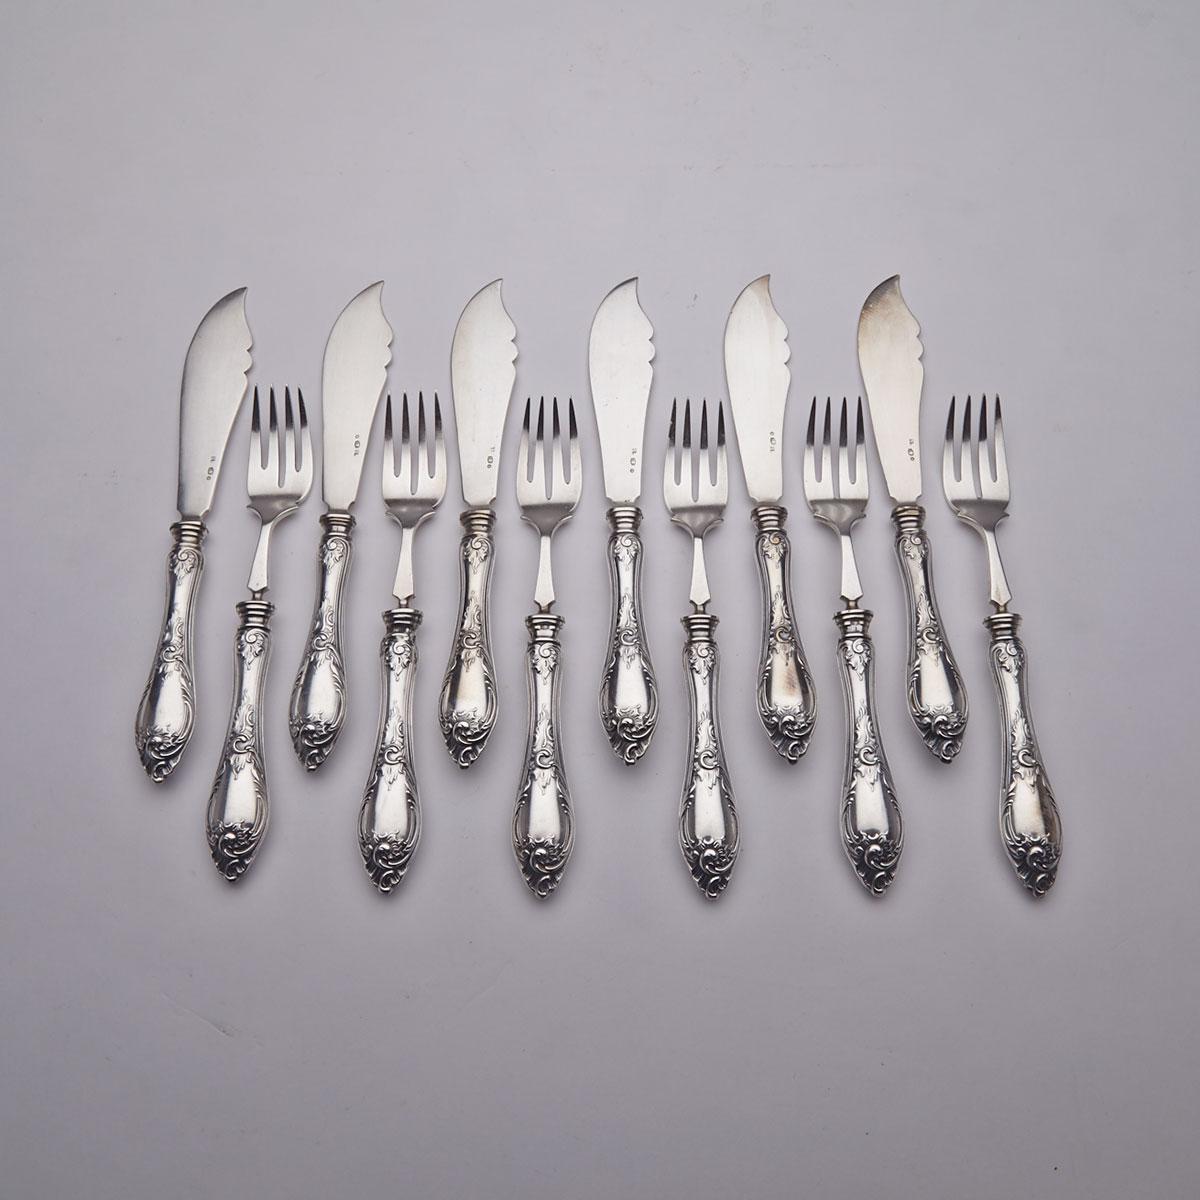 Six Polish Silver Fish Knives and Forks, Warsaw, early 20th century